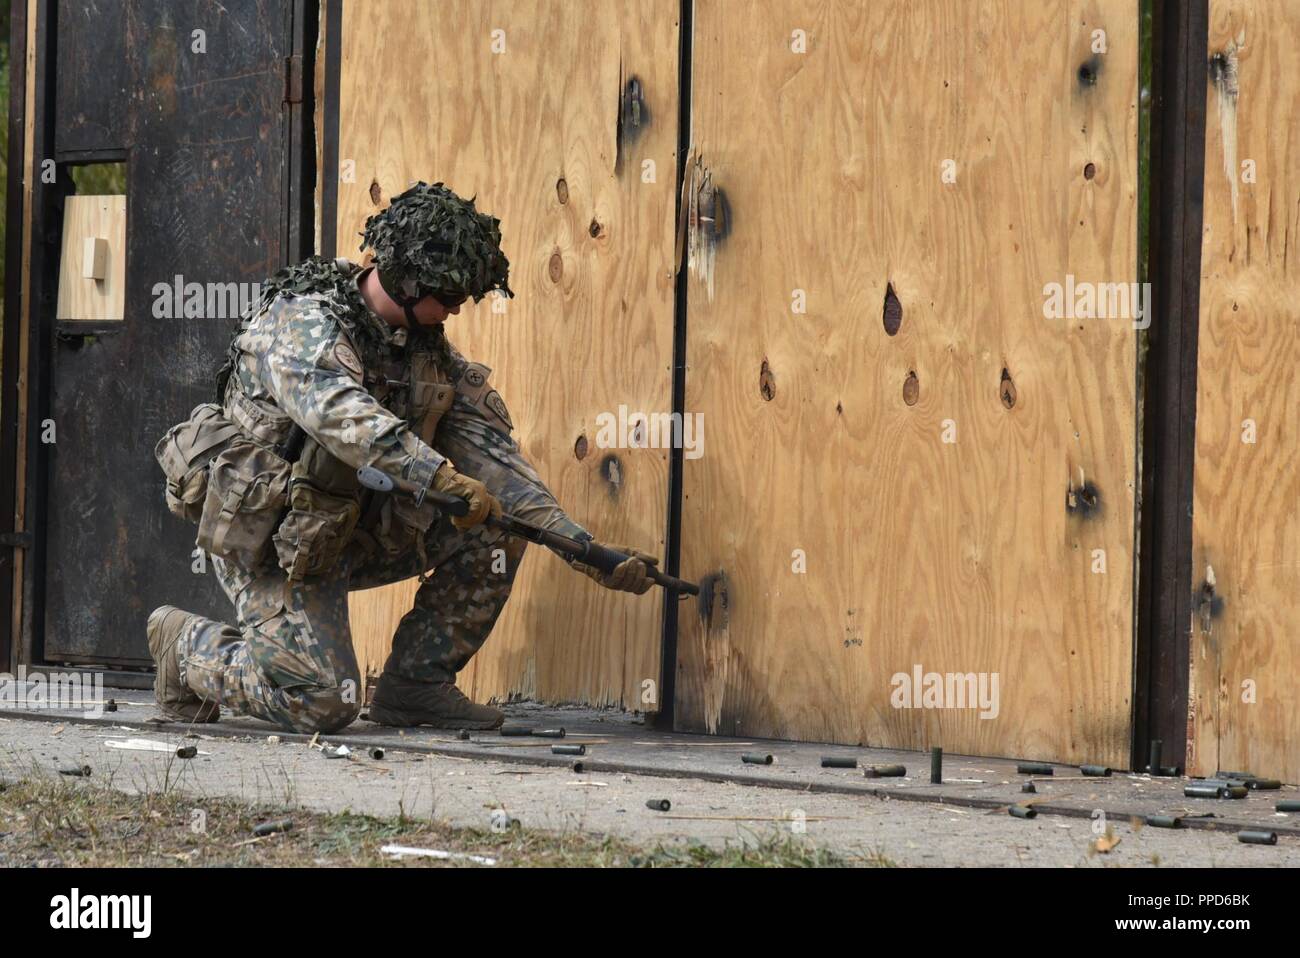 A Latvian Soldier uses an M500 shotgun to breach a door during the Urban Breach Training  at the Grafenwoehr Training Area, Germany, Aug. 29. 2018. U.S. Soldiers assigned to the 7th Army Combined Arms Training Center (CATC), 7th Army Training Command, instructed U.S. Soldiers assigned to various units across Europe, Latvian soldiers and Dutch soldiers on how to conduct urban breaching and offered new techniques for entering hostile or unknown buildings. Stock Photo